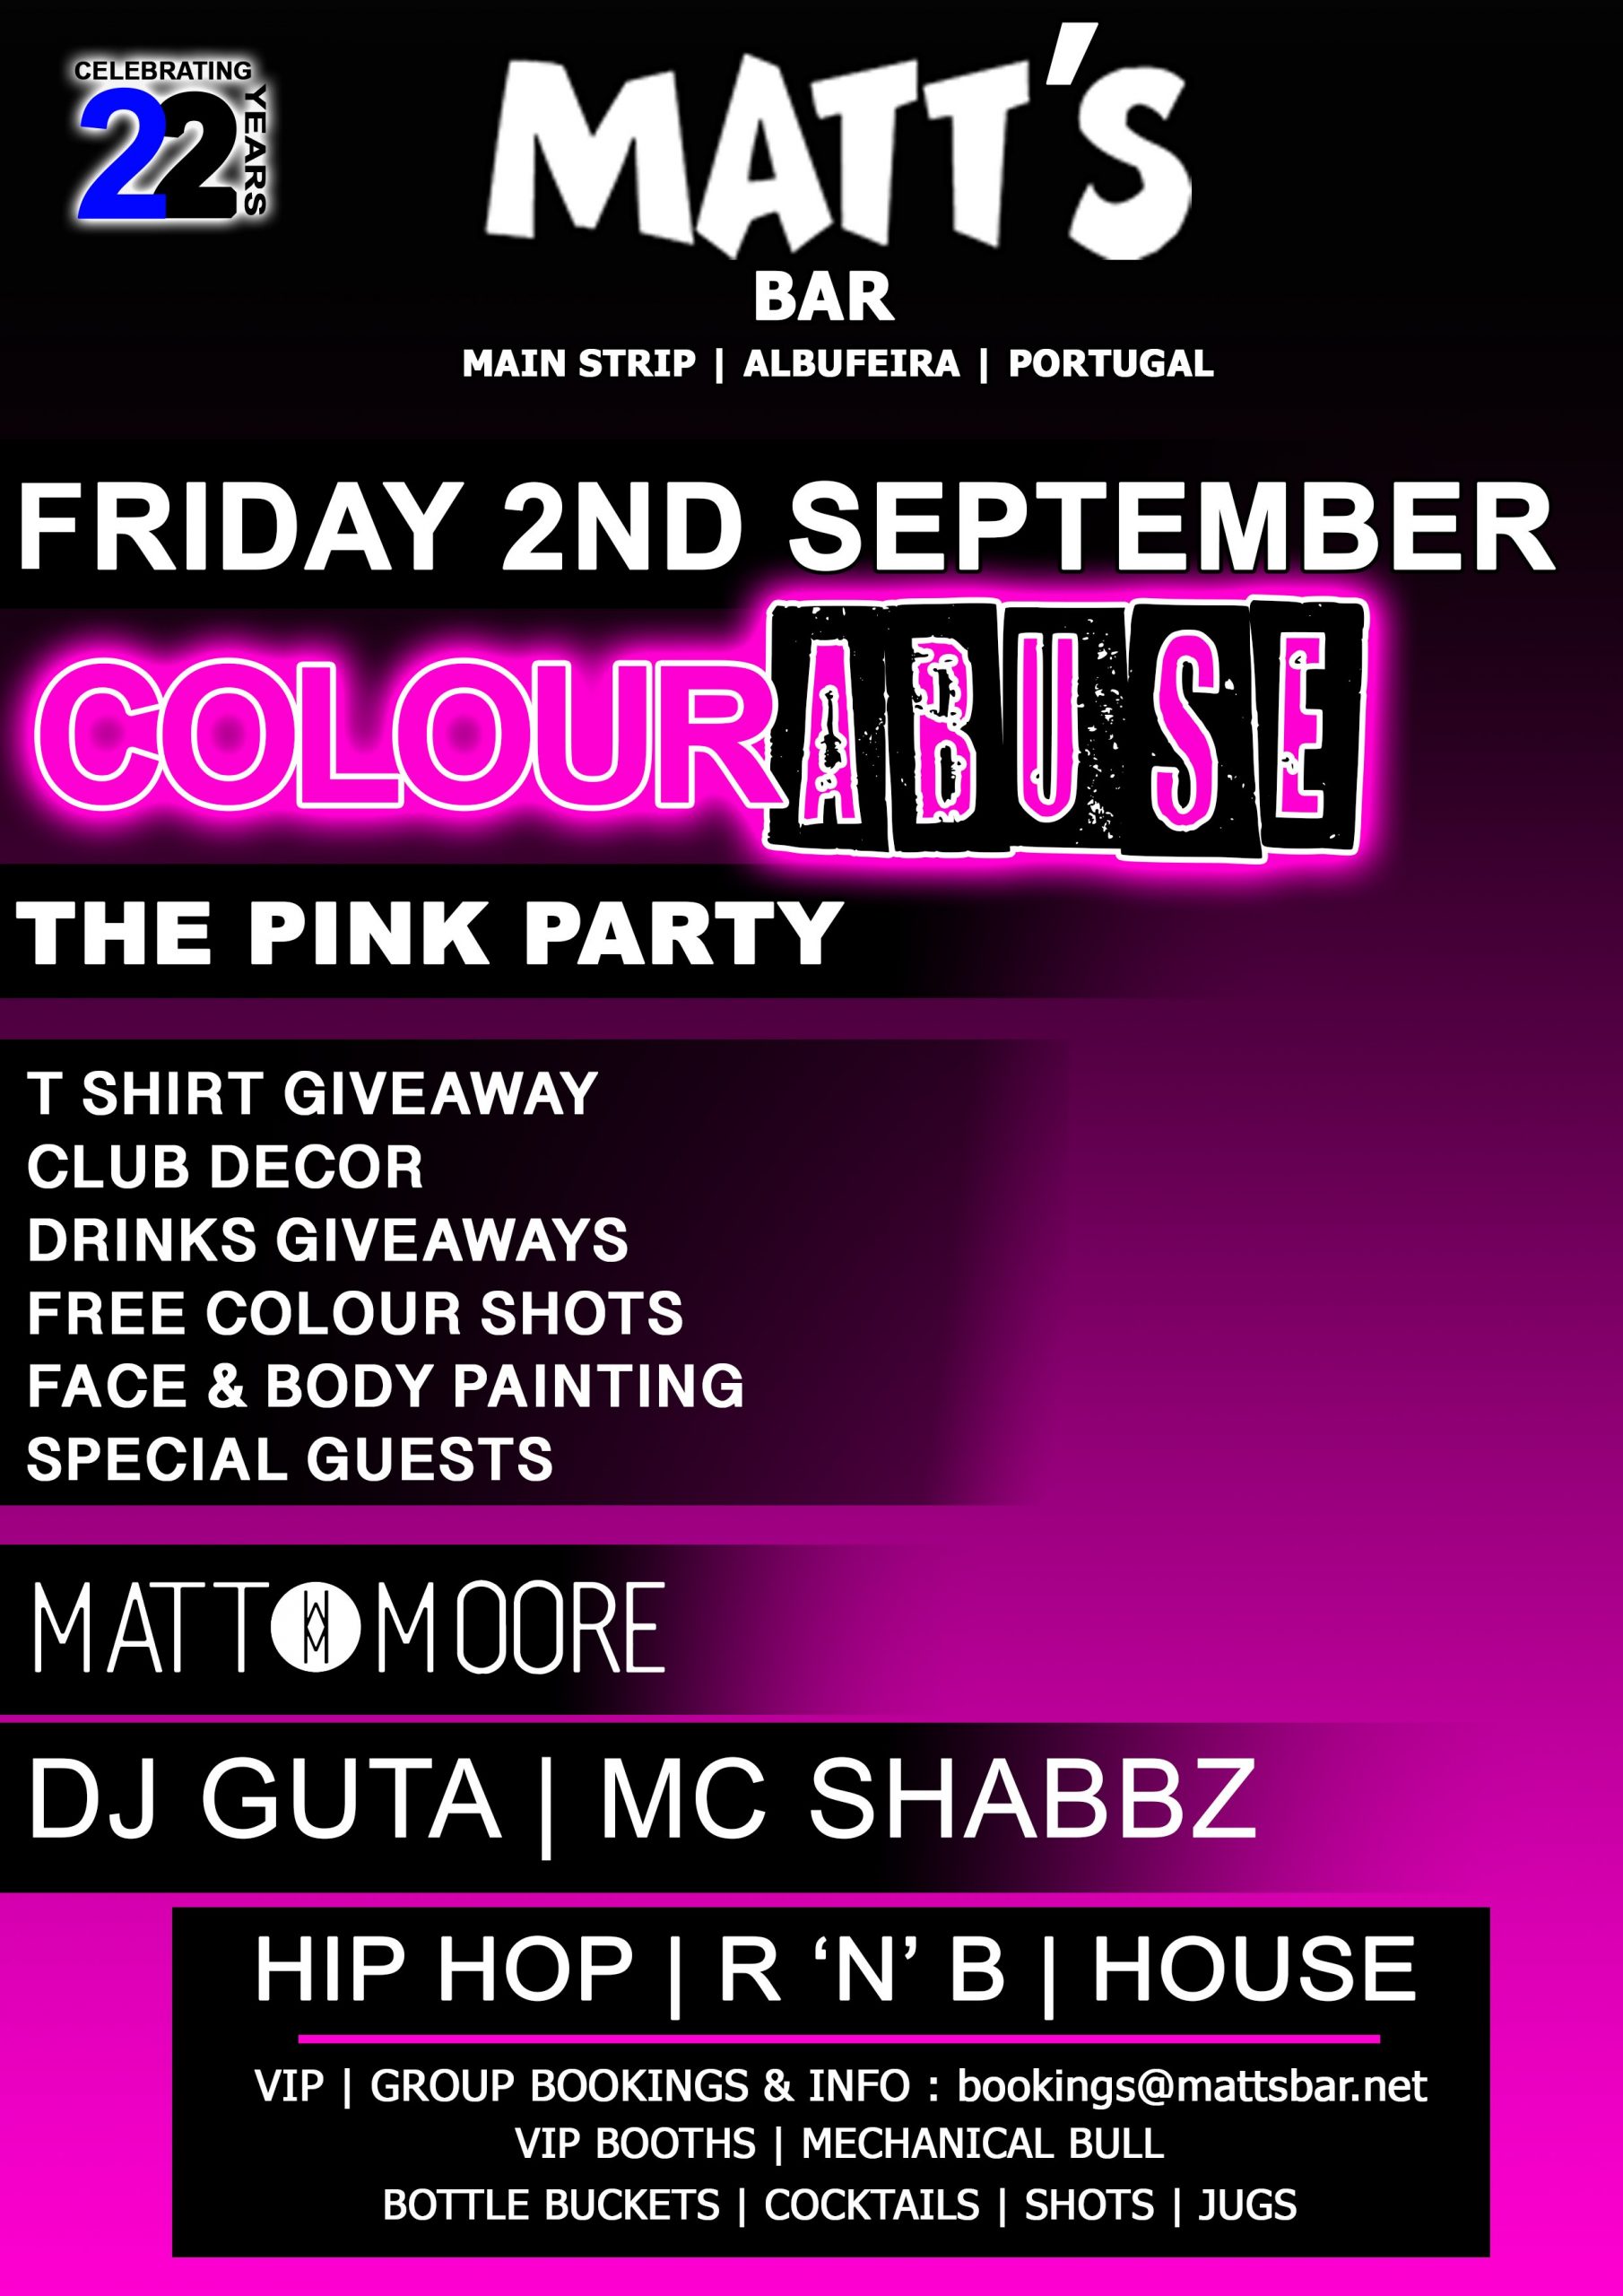 COLOUR ABUSE – THE PINK PARTY